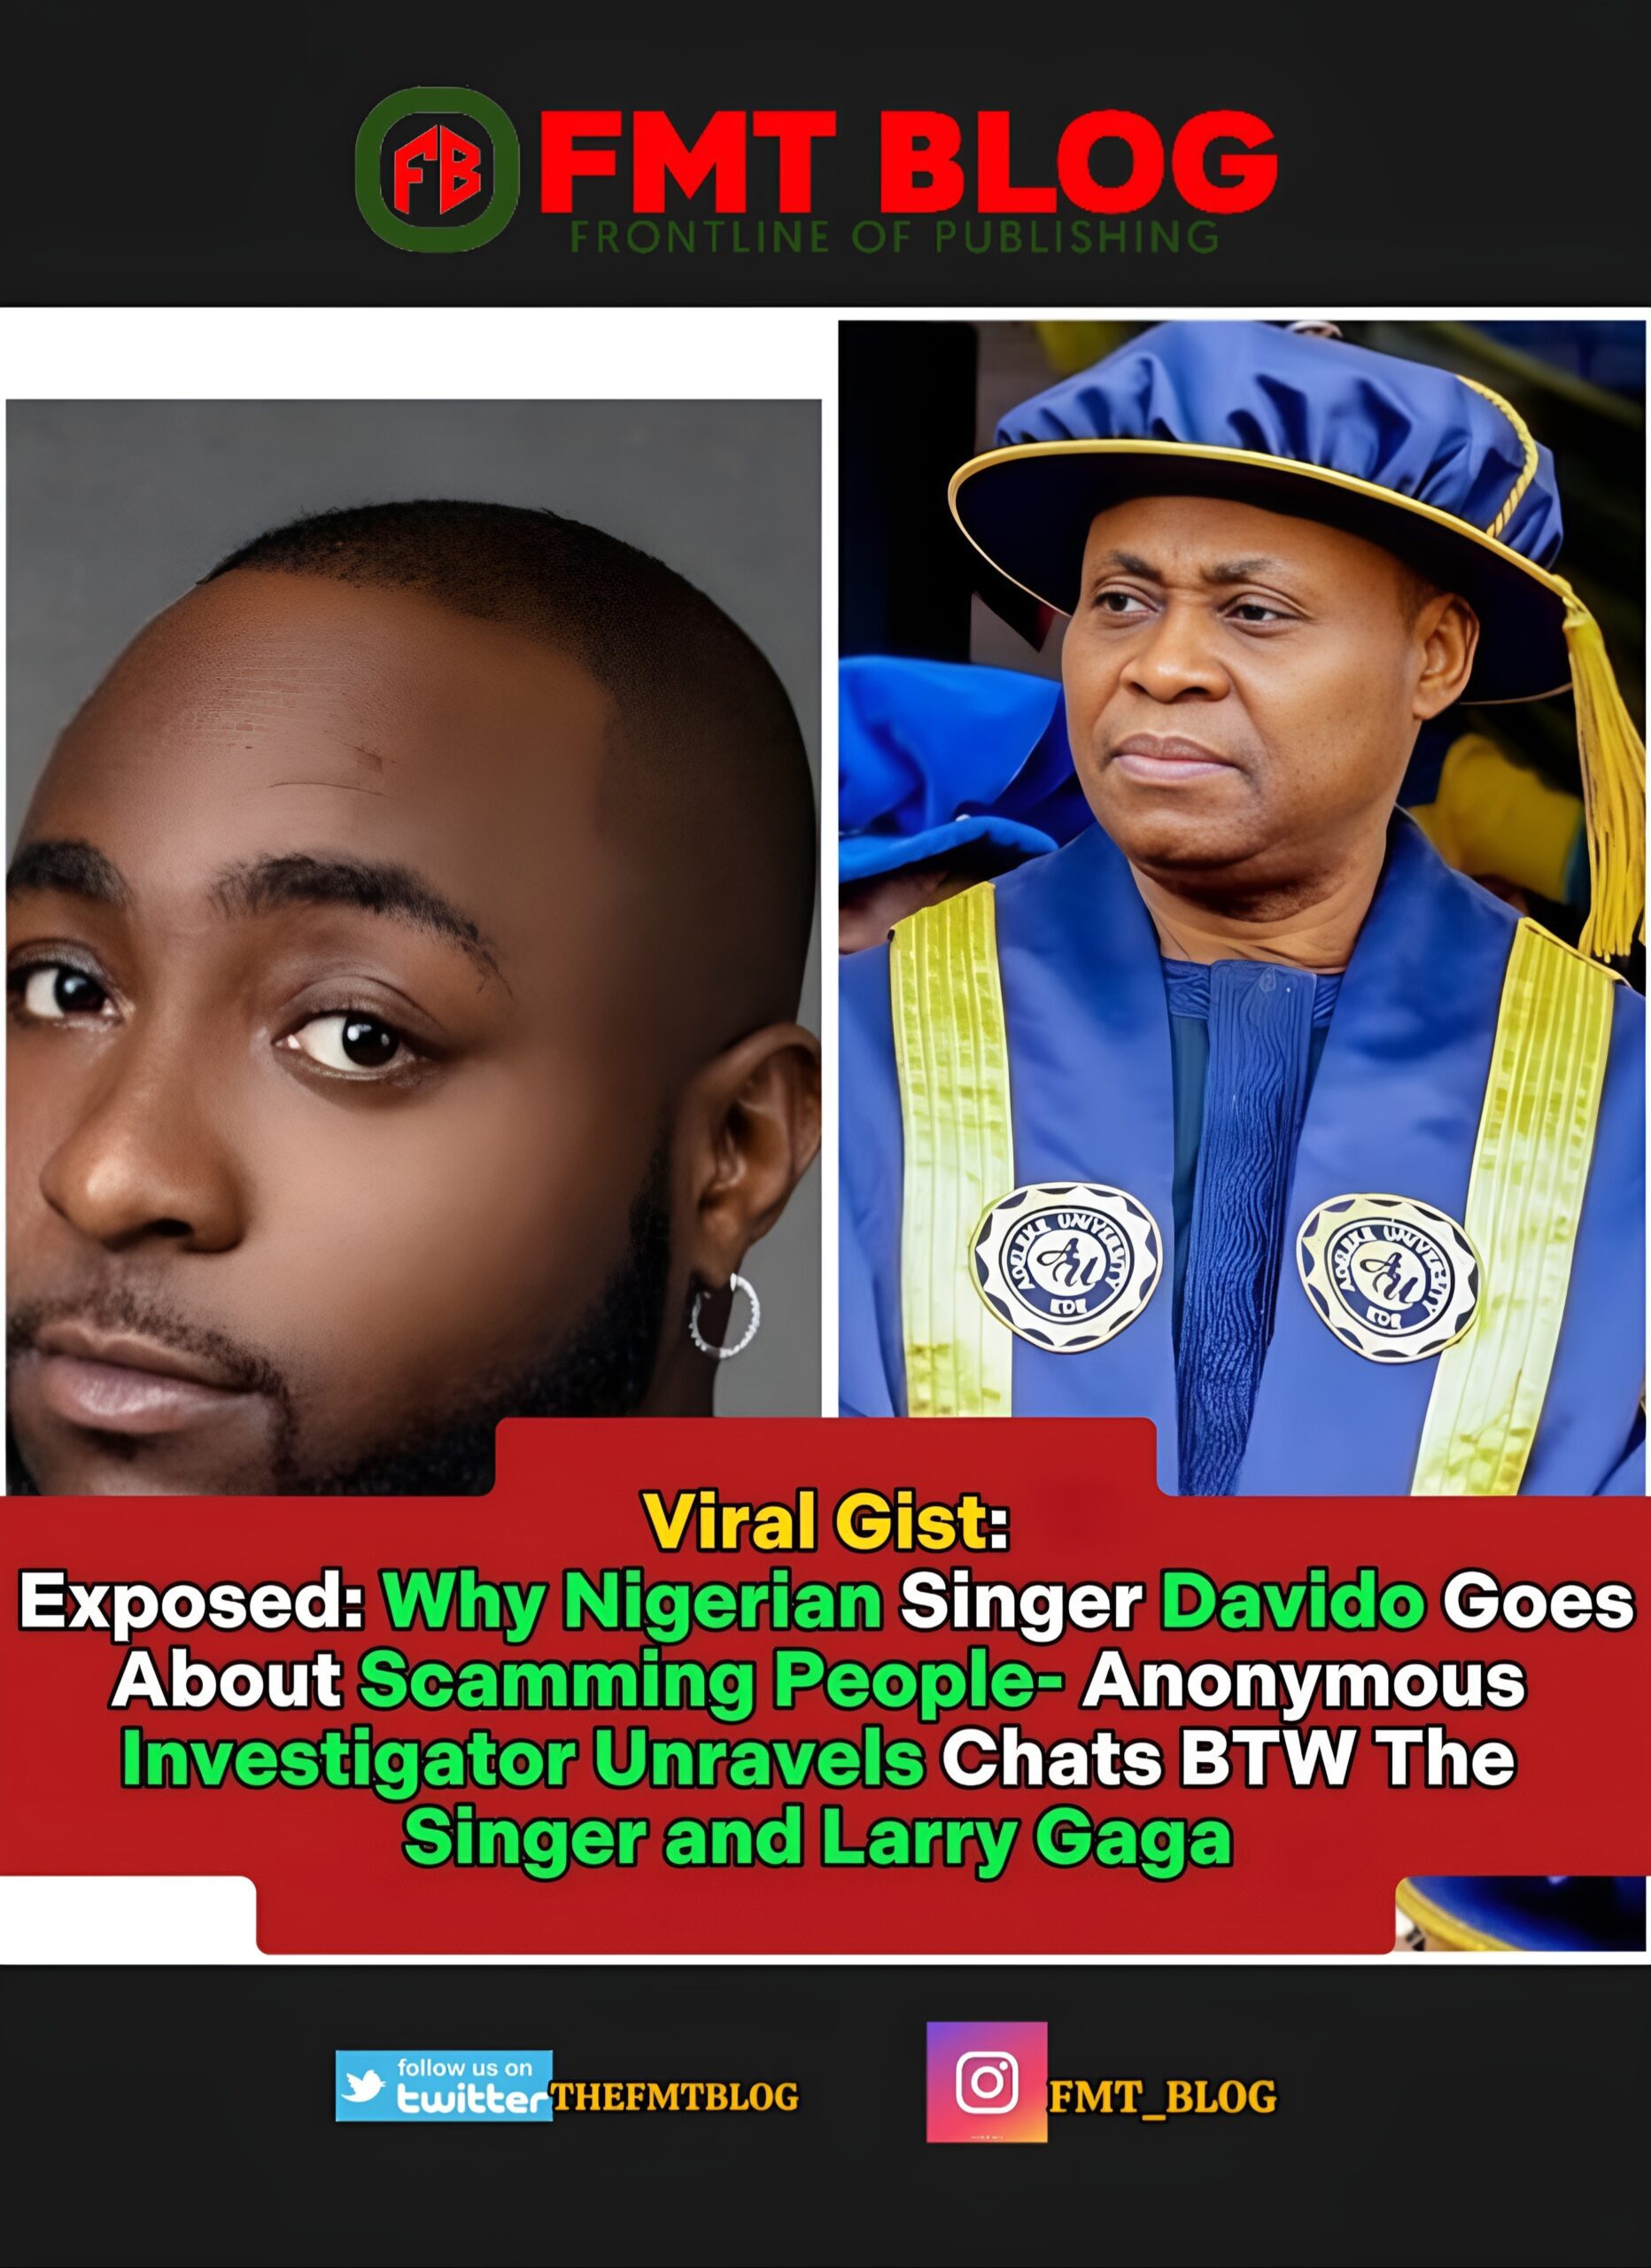 Exposed: Why Nigerian Singer Davido Goes About Scamming People!- Anonymous Investigator Unravels Alleged Chat Btw The Singer and Larry Gaga